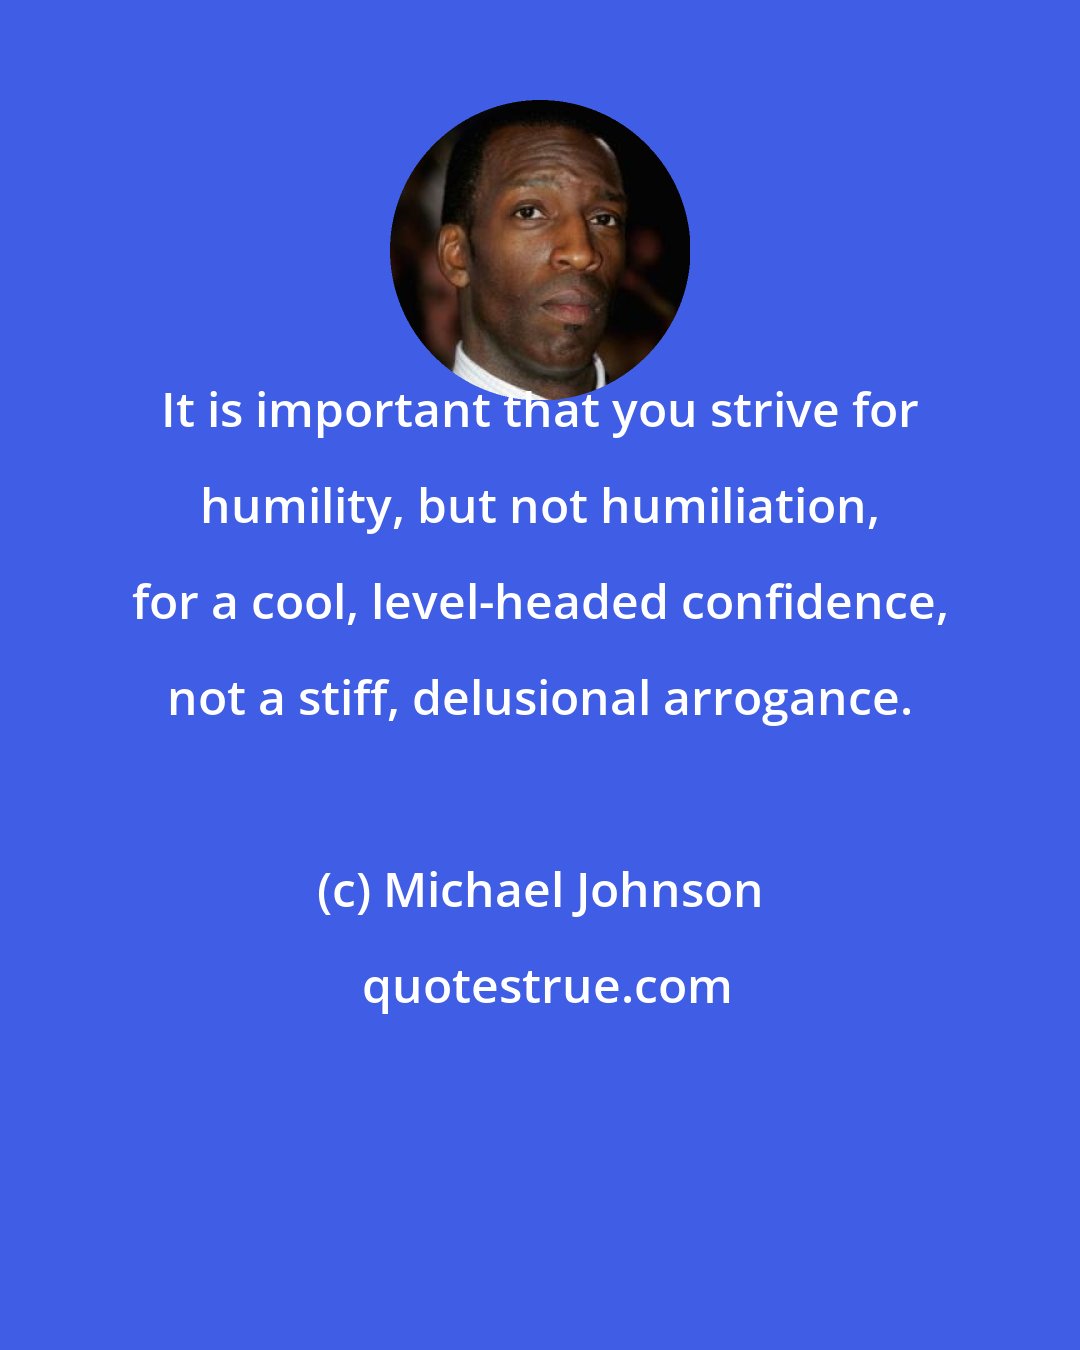 Michael Johnson: It is important that you strive for humility, but not humiliation, for a cool, level-headed confidence, not a stiff, delusional arrogance.